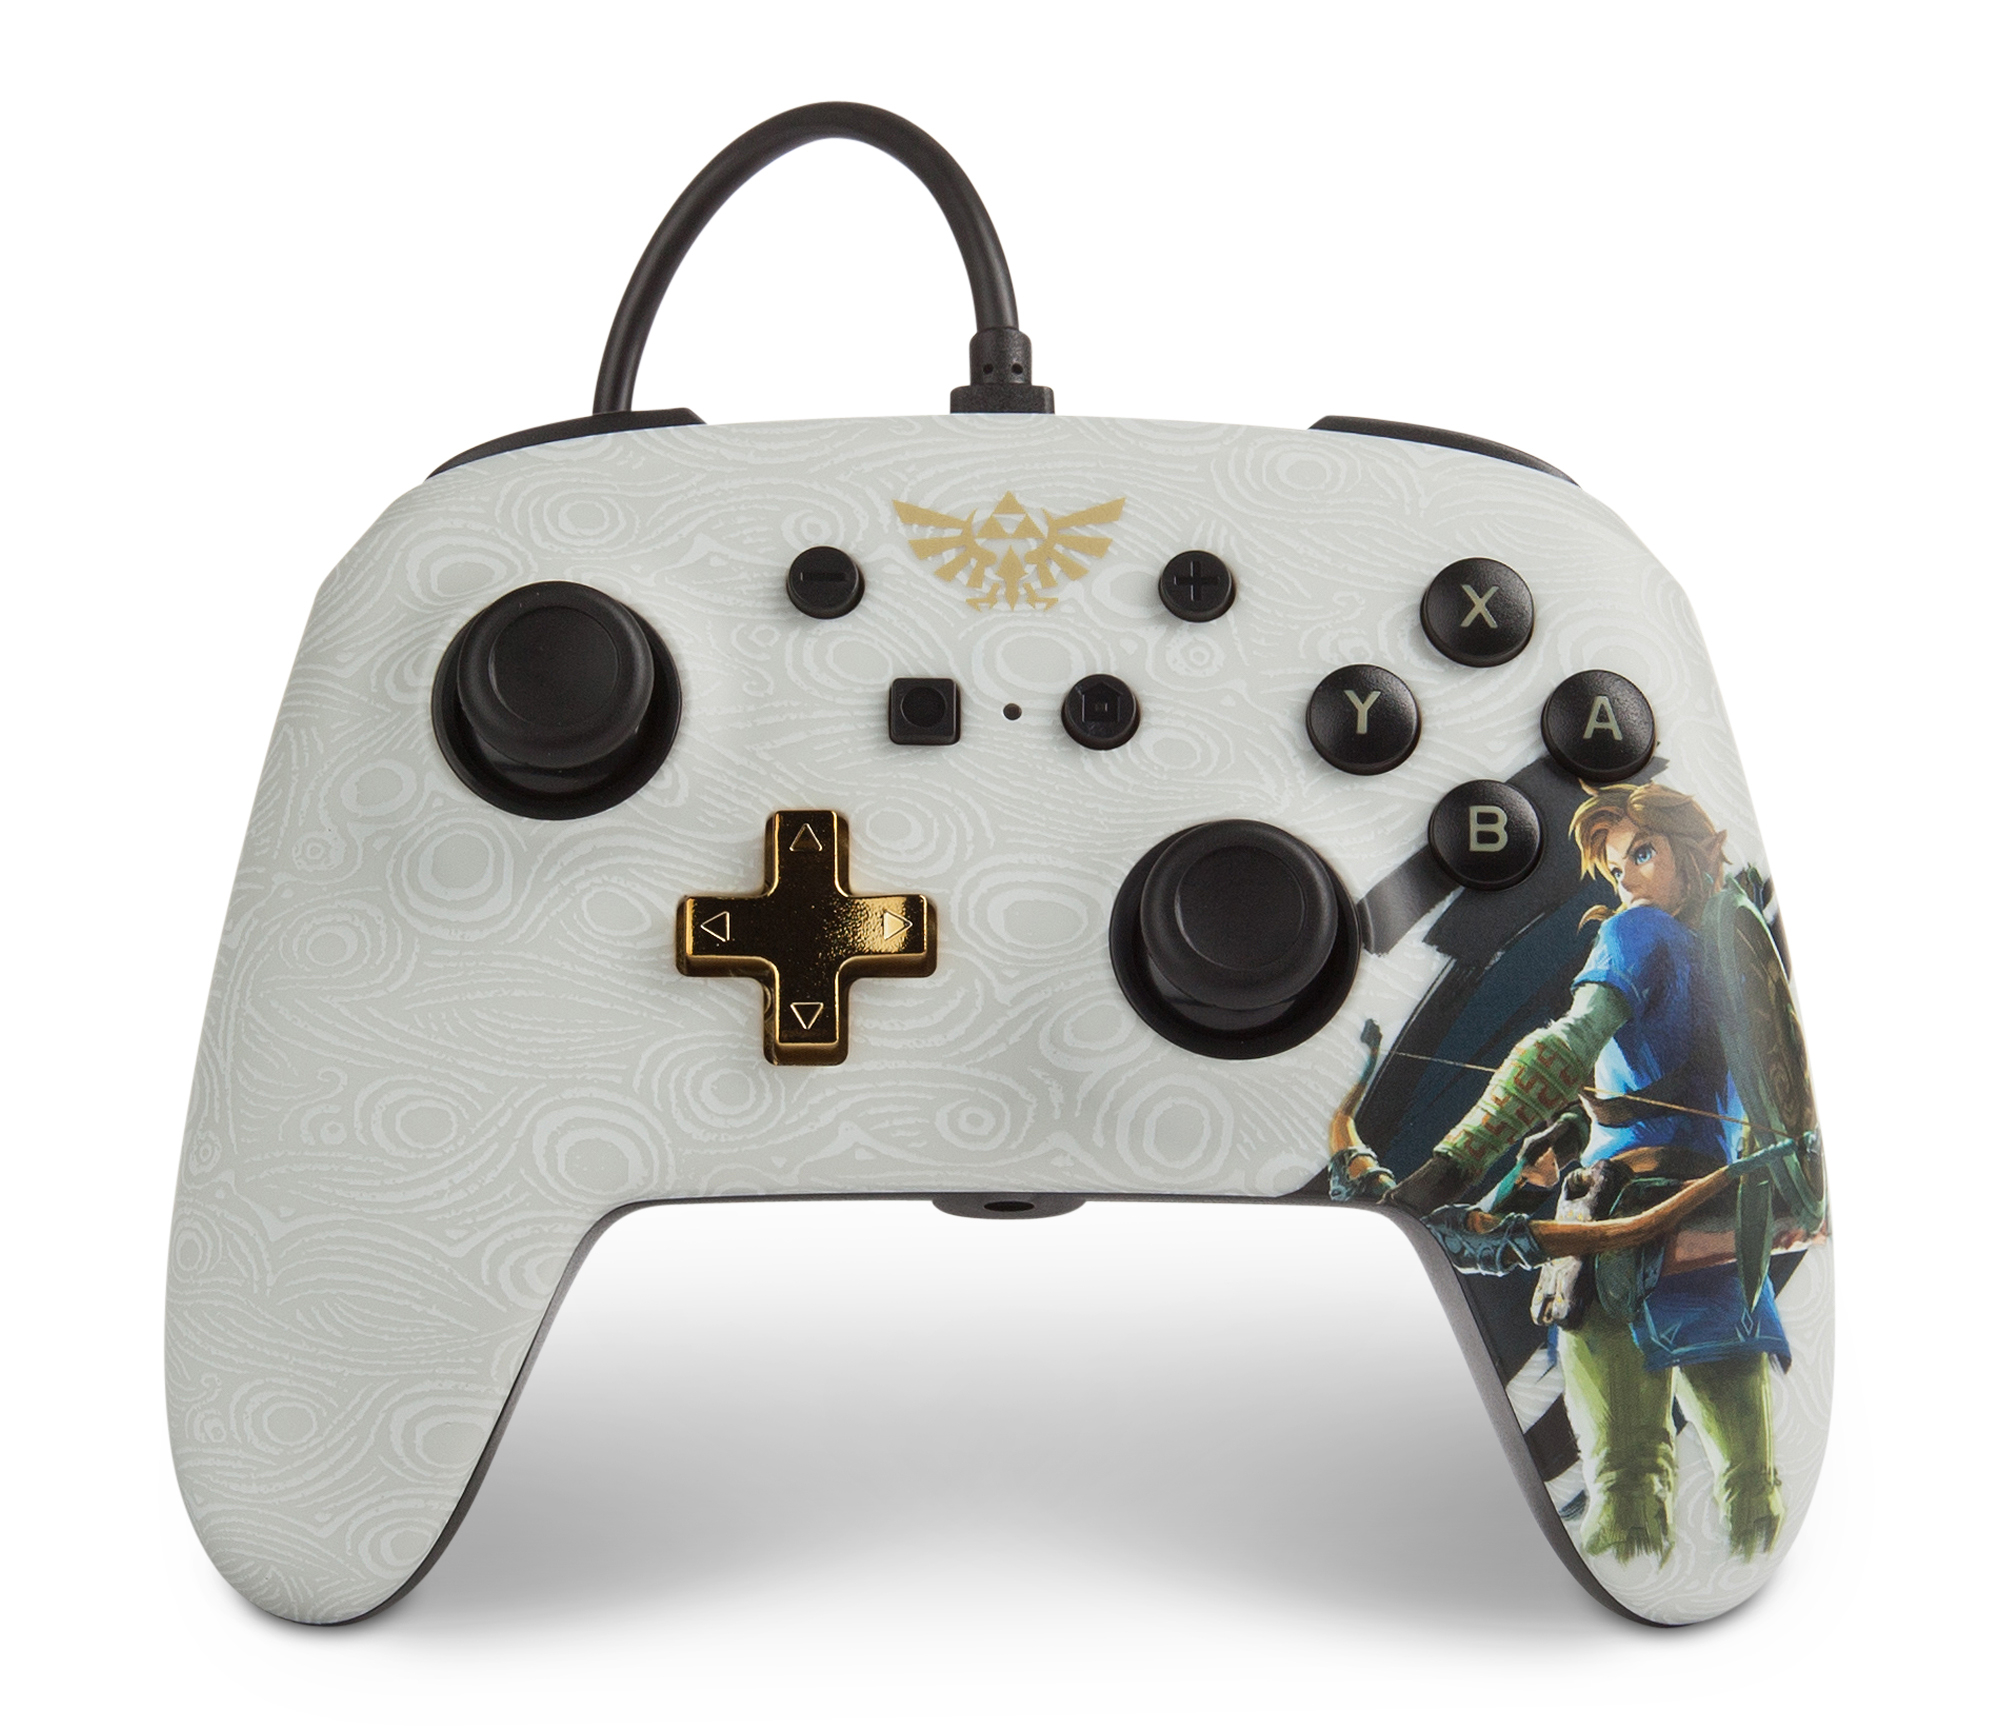 PowerA Enhanced Wired Controller for Nintendo Switch - Link - image 1 of 12